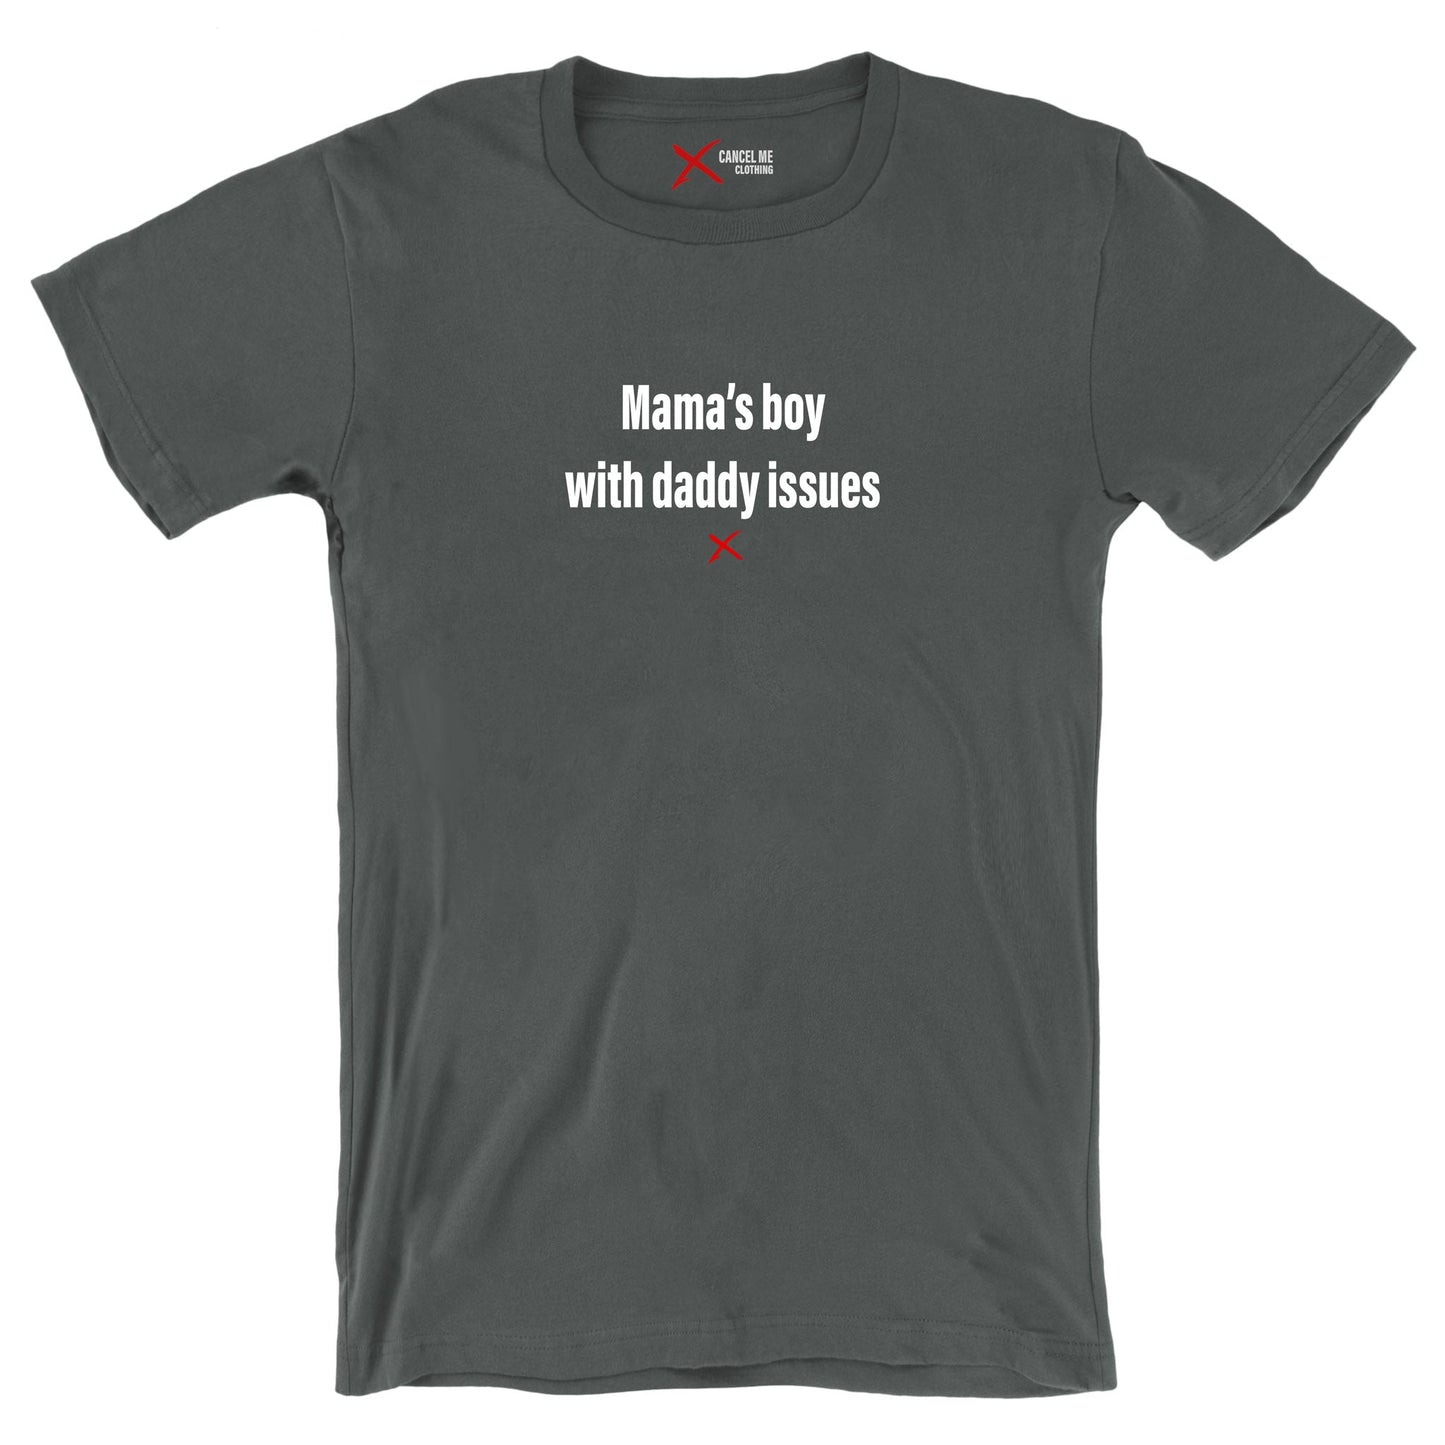 Mama's boy with daddy issues - Shirt